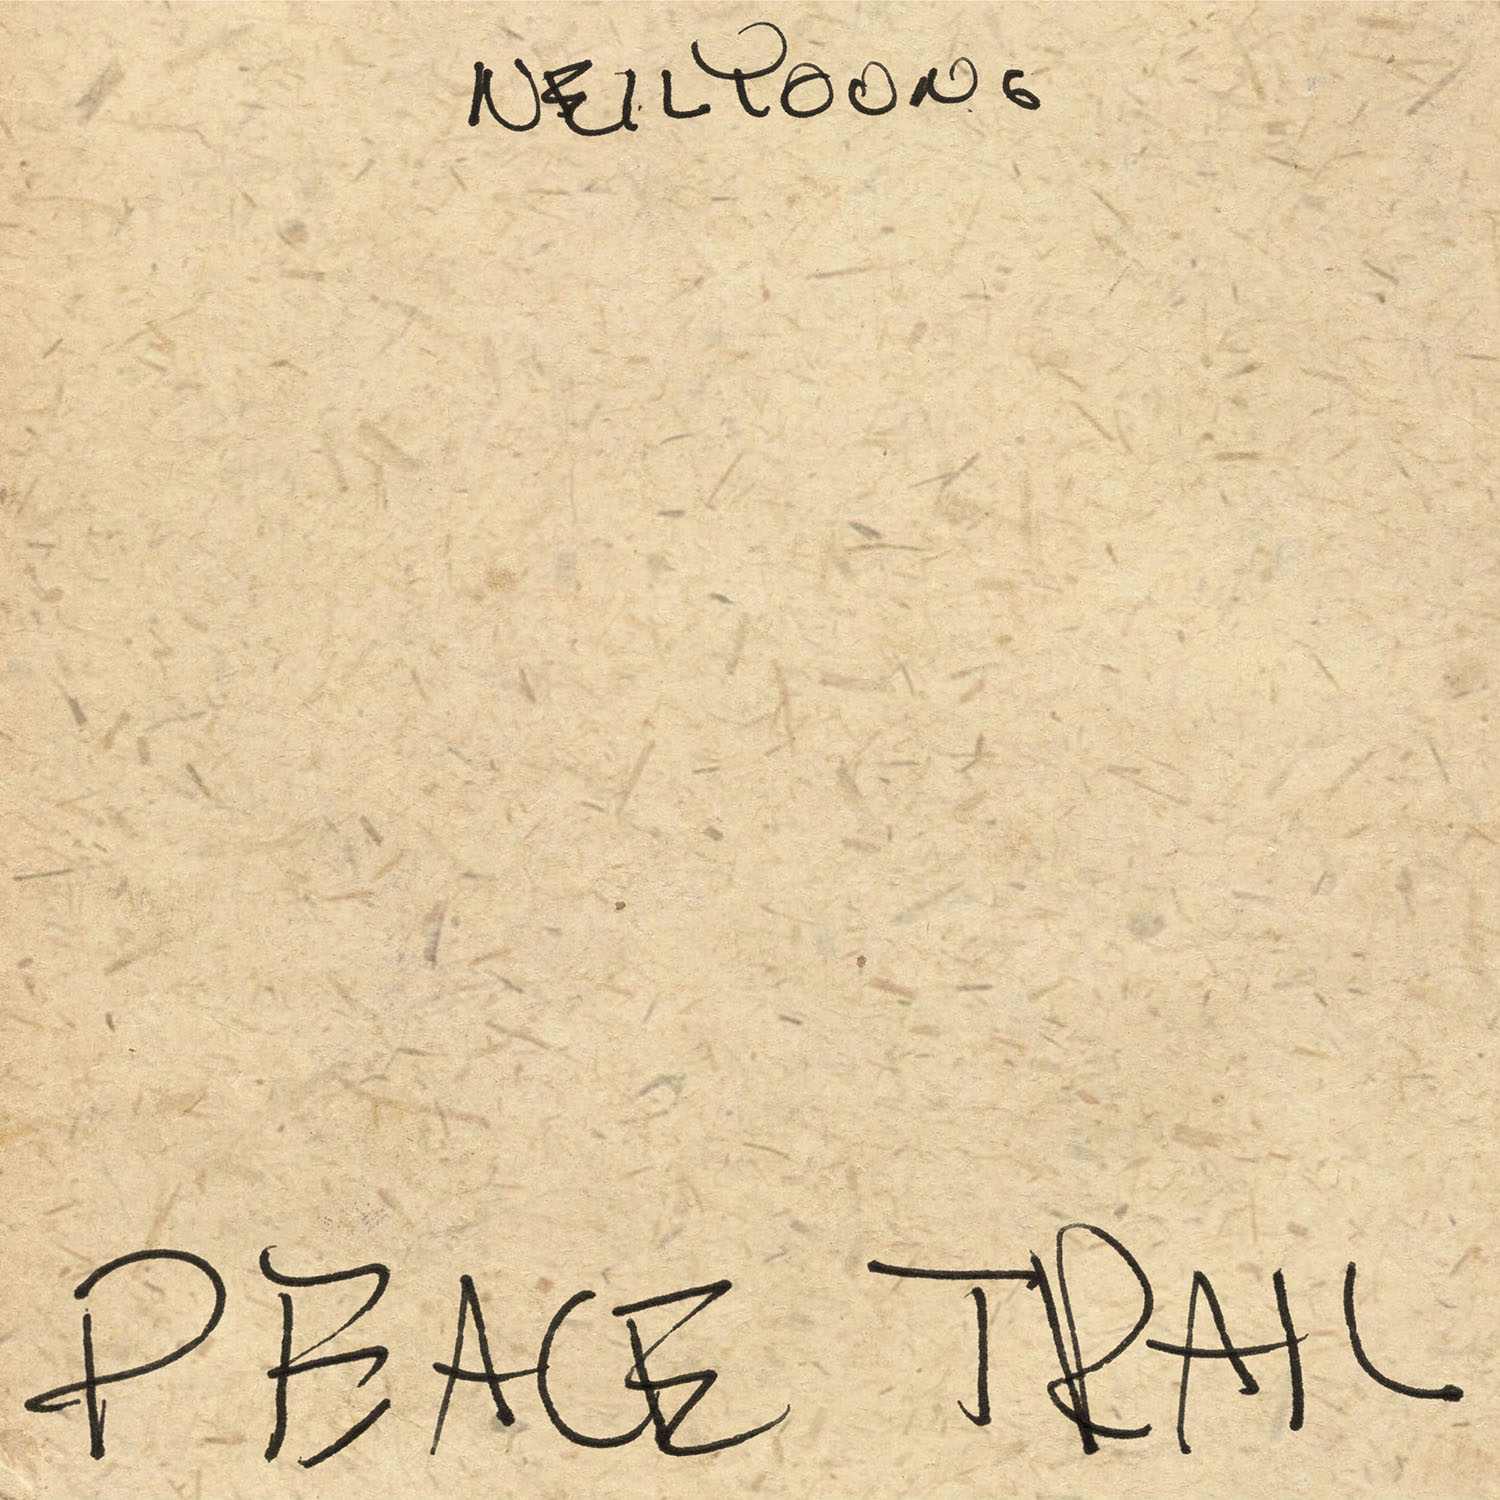 neil_young-2016-peace_trail